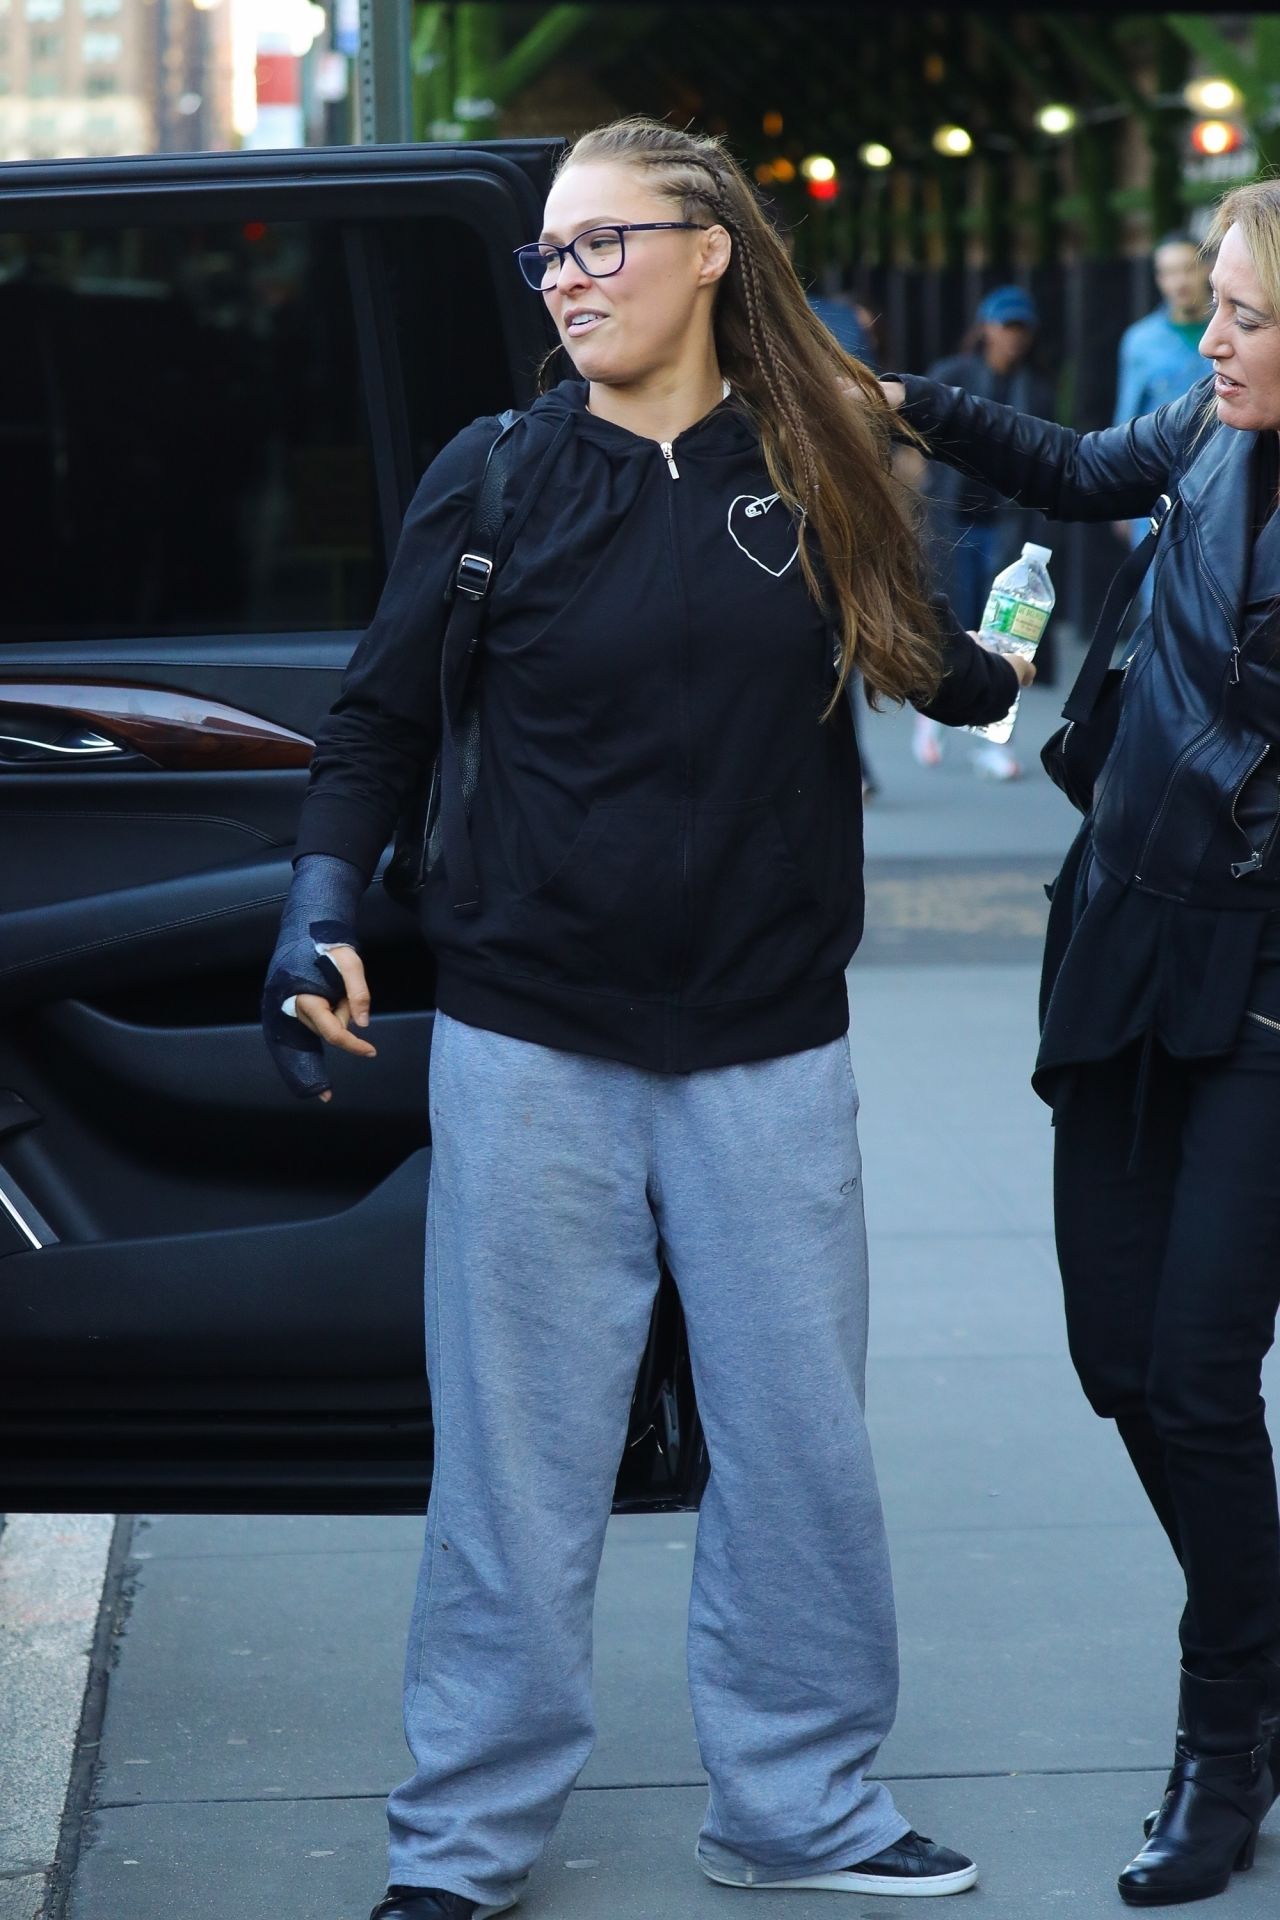 https://celebmafia.com/wp-content/uploads/2019/04/ronda-rousey-arriving-to-appear-on-the-late-show-with-stephen-colbert-in-nyc-04-17-2019-1.jpg